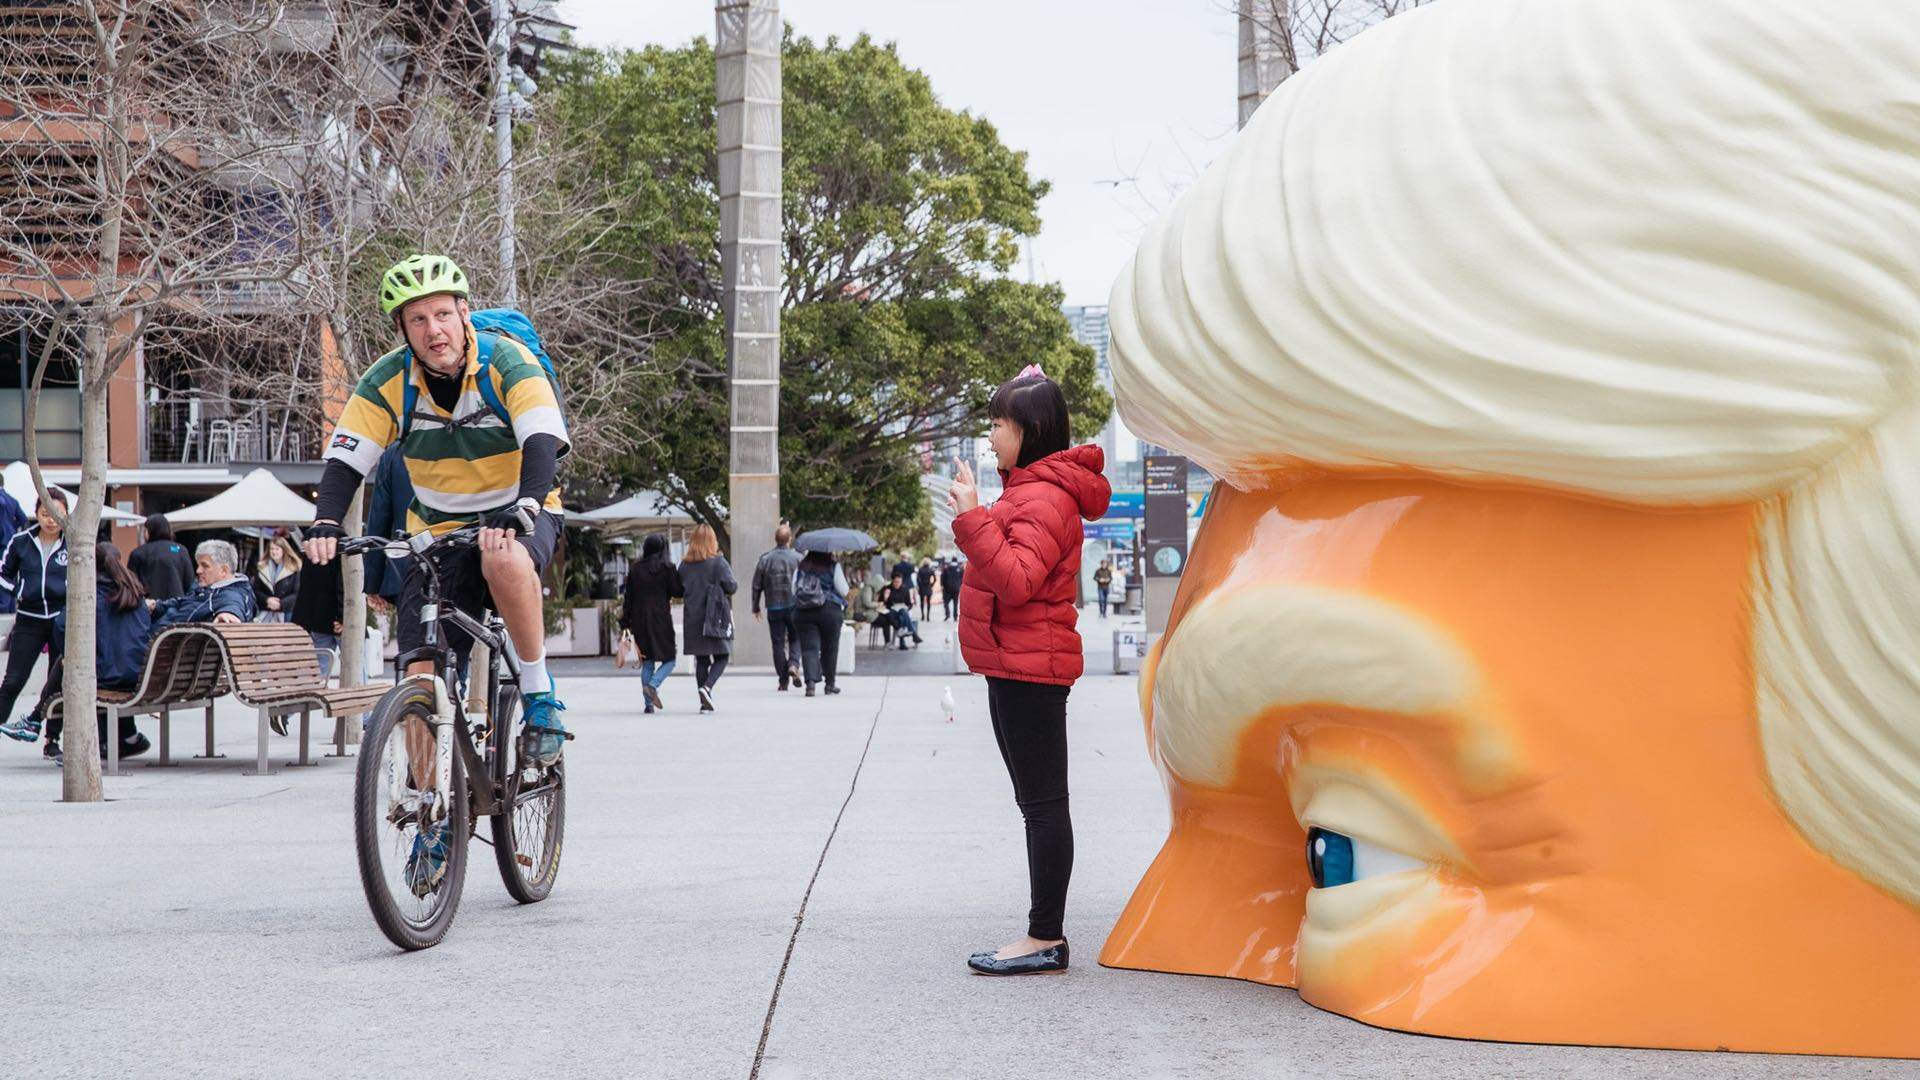 A Giant Sculpture of Donald Trump's Empty Head Has Popped Up by Sydney Harbour